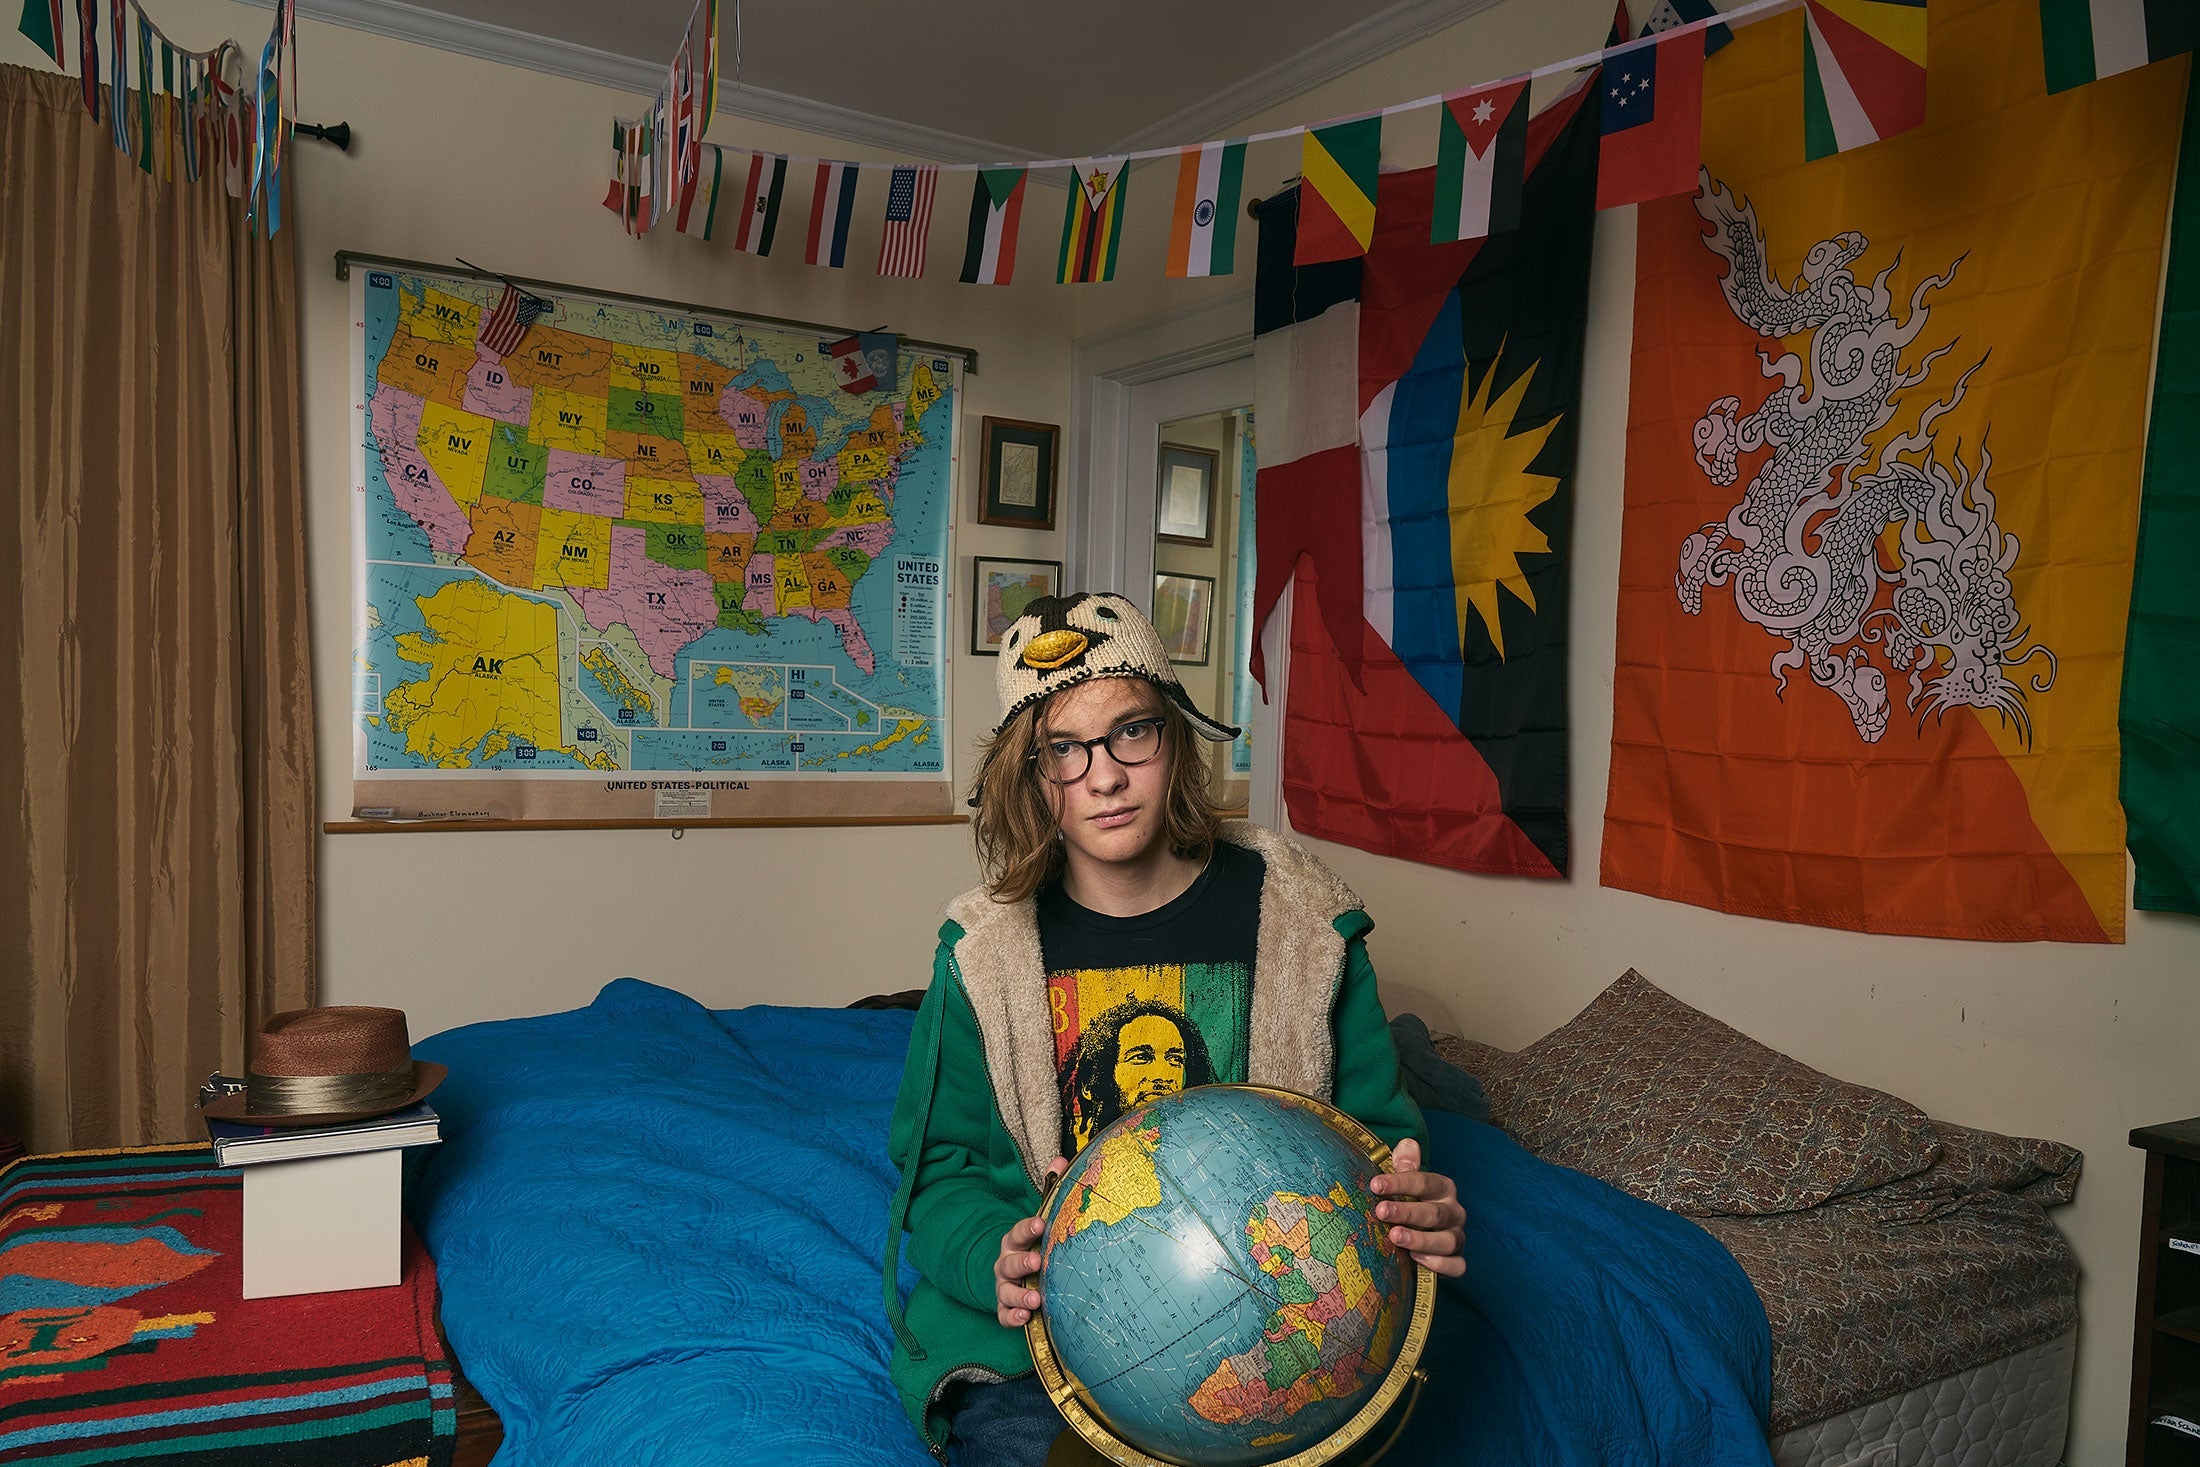 Satchel, holding a globe in his bedroom, 10th grade.